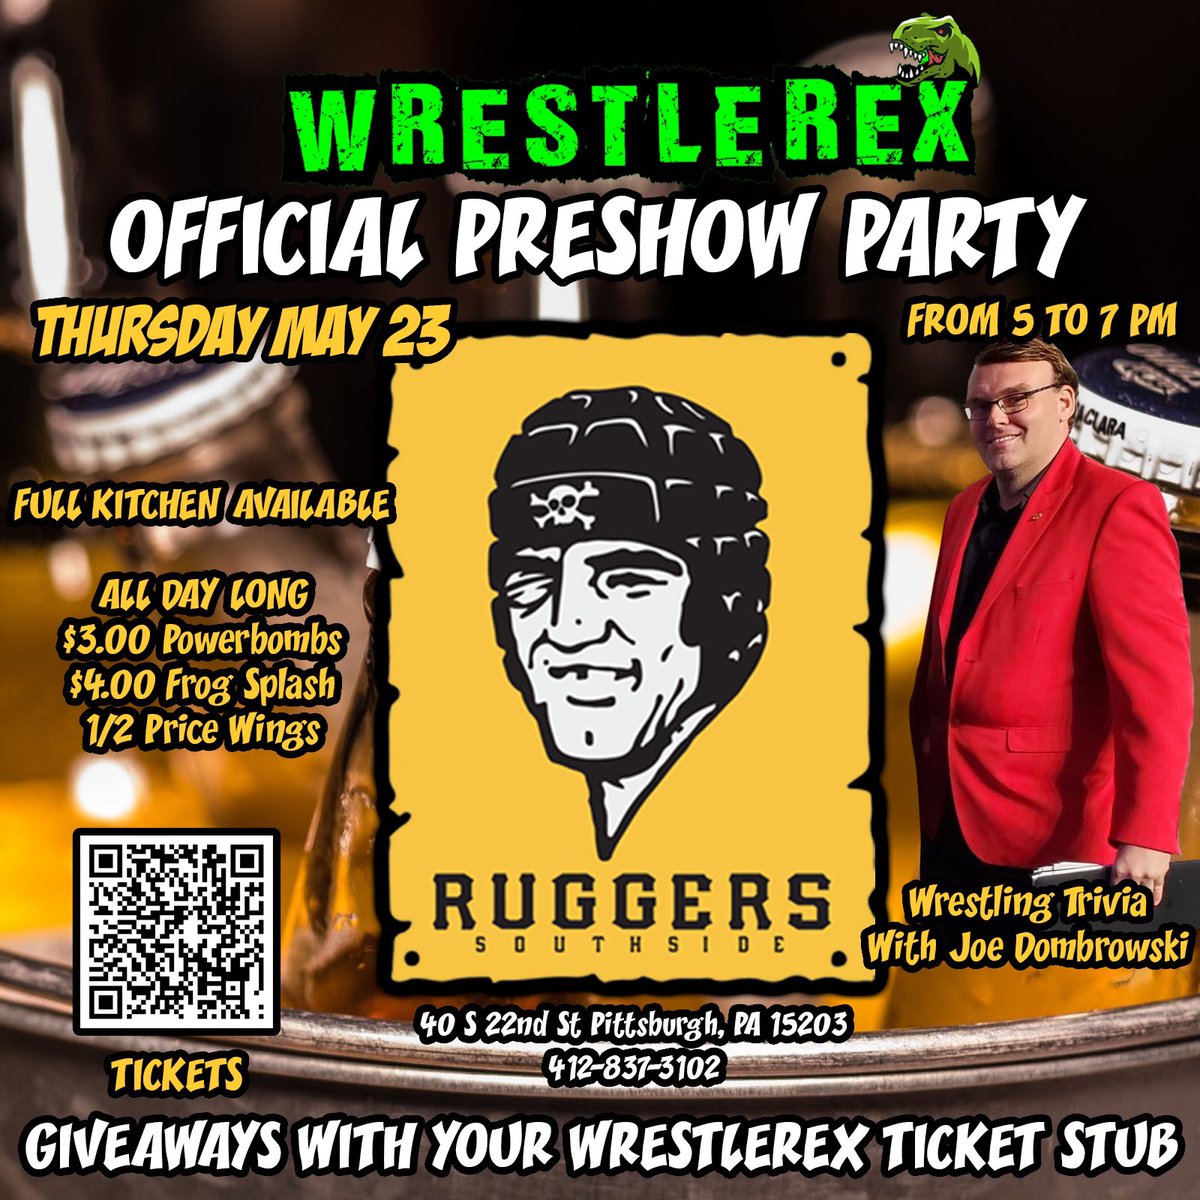 Attention @SouthSidePgh Meet us at Ruggers Pub from 5PM-7PM Next Thursday (5-23) for the @wrestlerex412 Pre-Show Party & Trivia Hosted by @joe_dombrowski